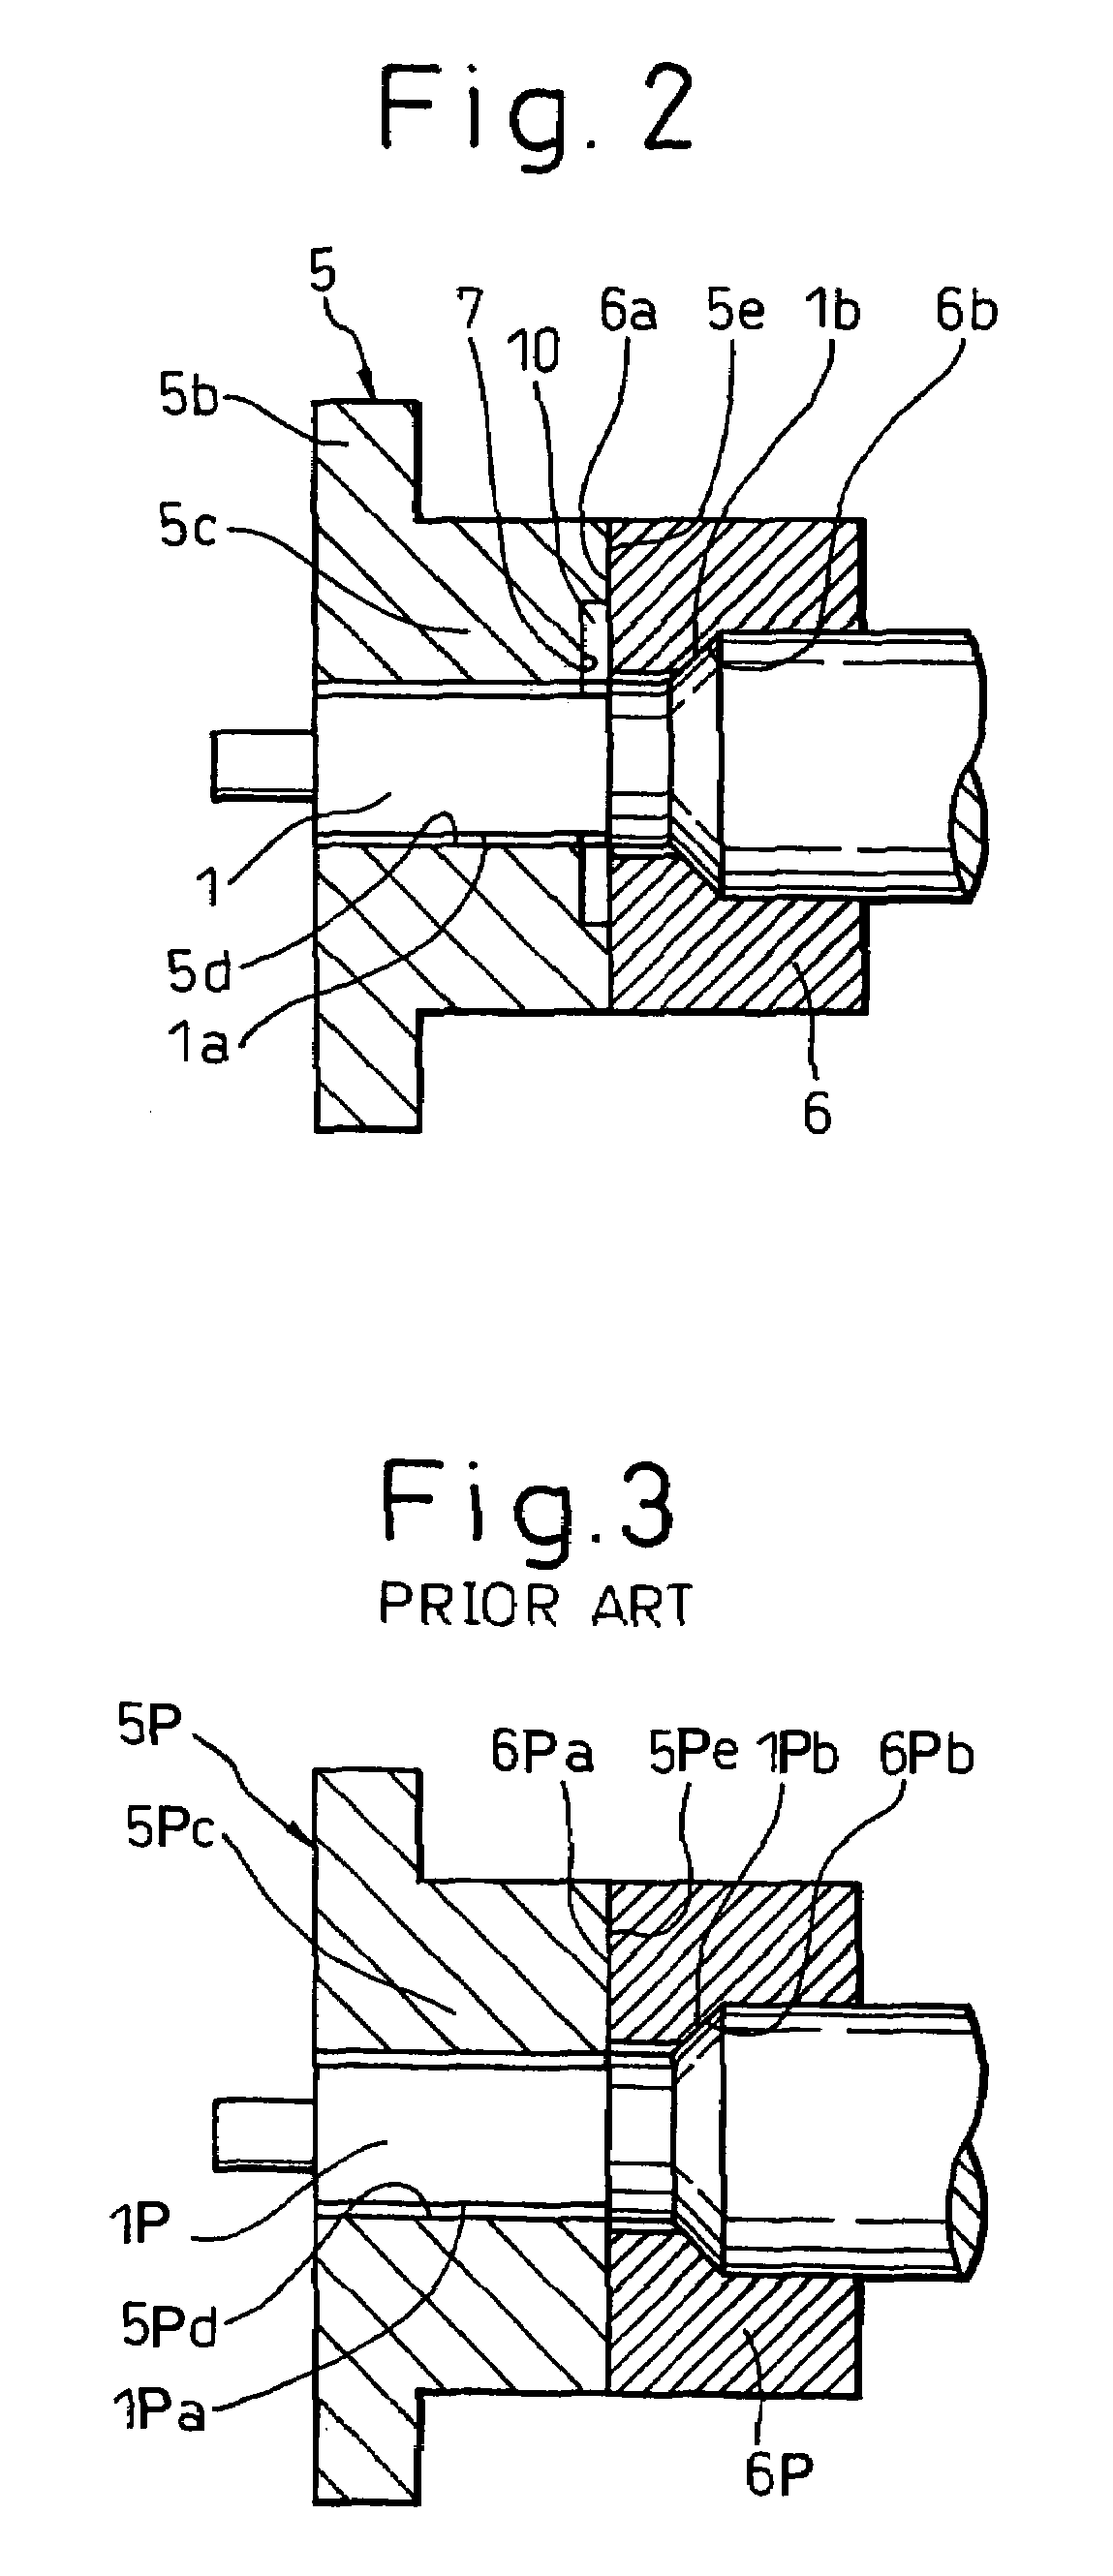 Power transmission mechanism capable of preventing breakage of a rotating shaft